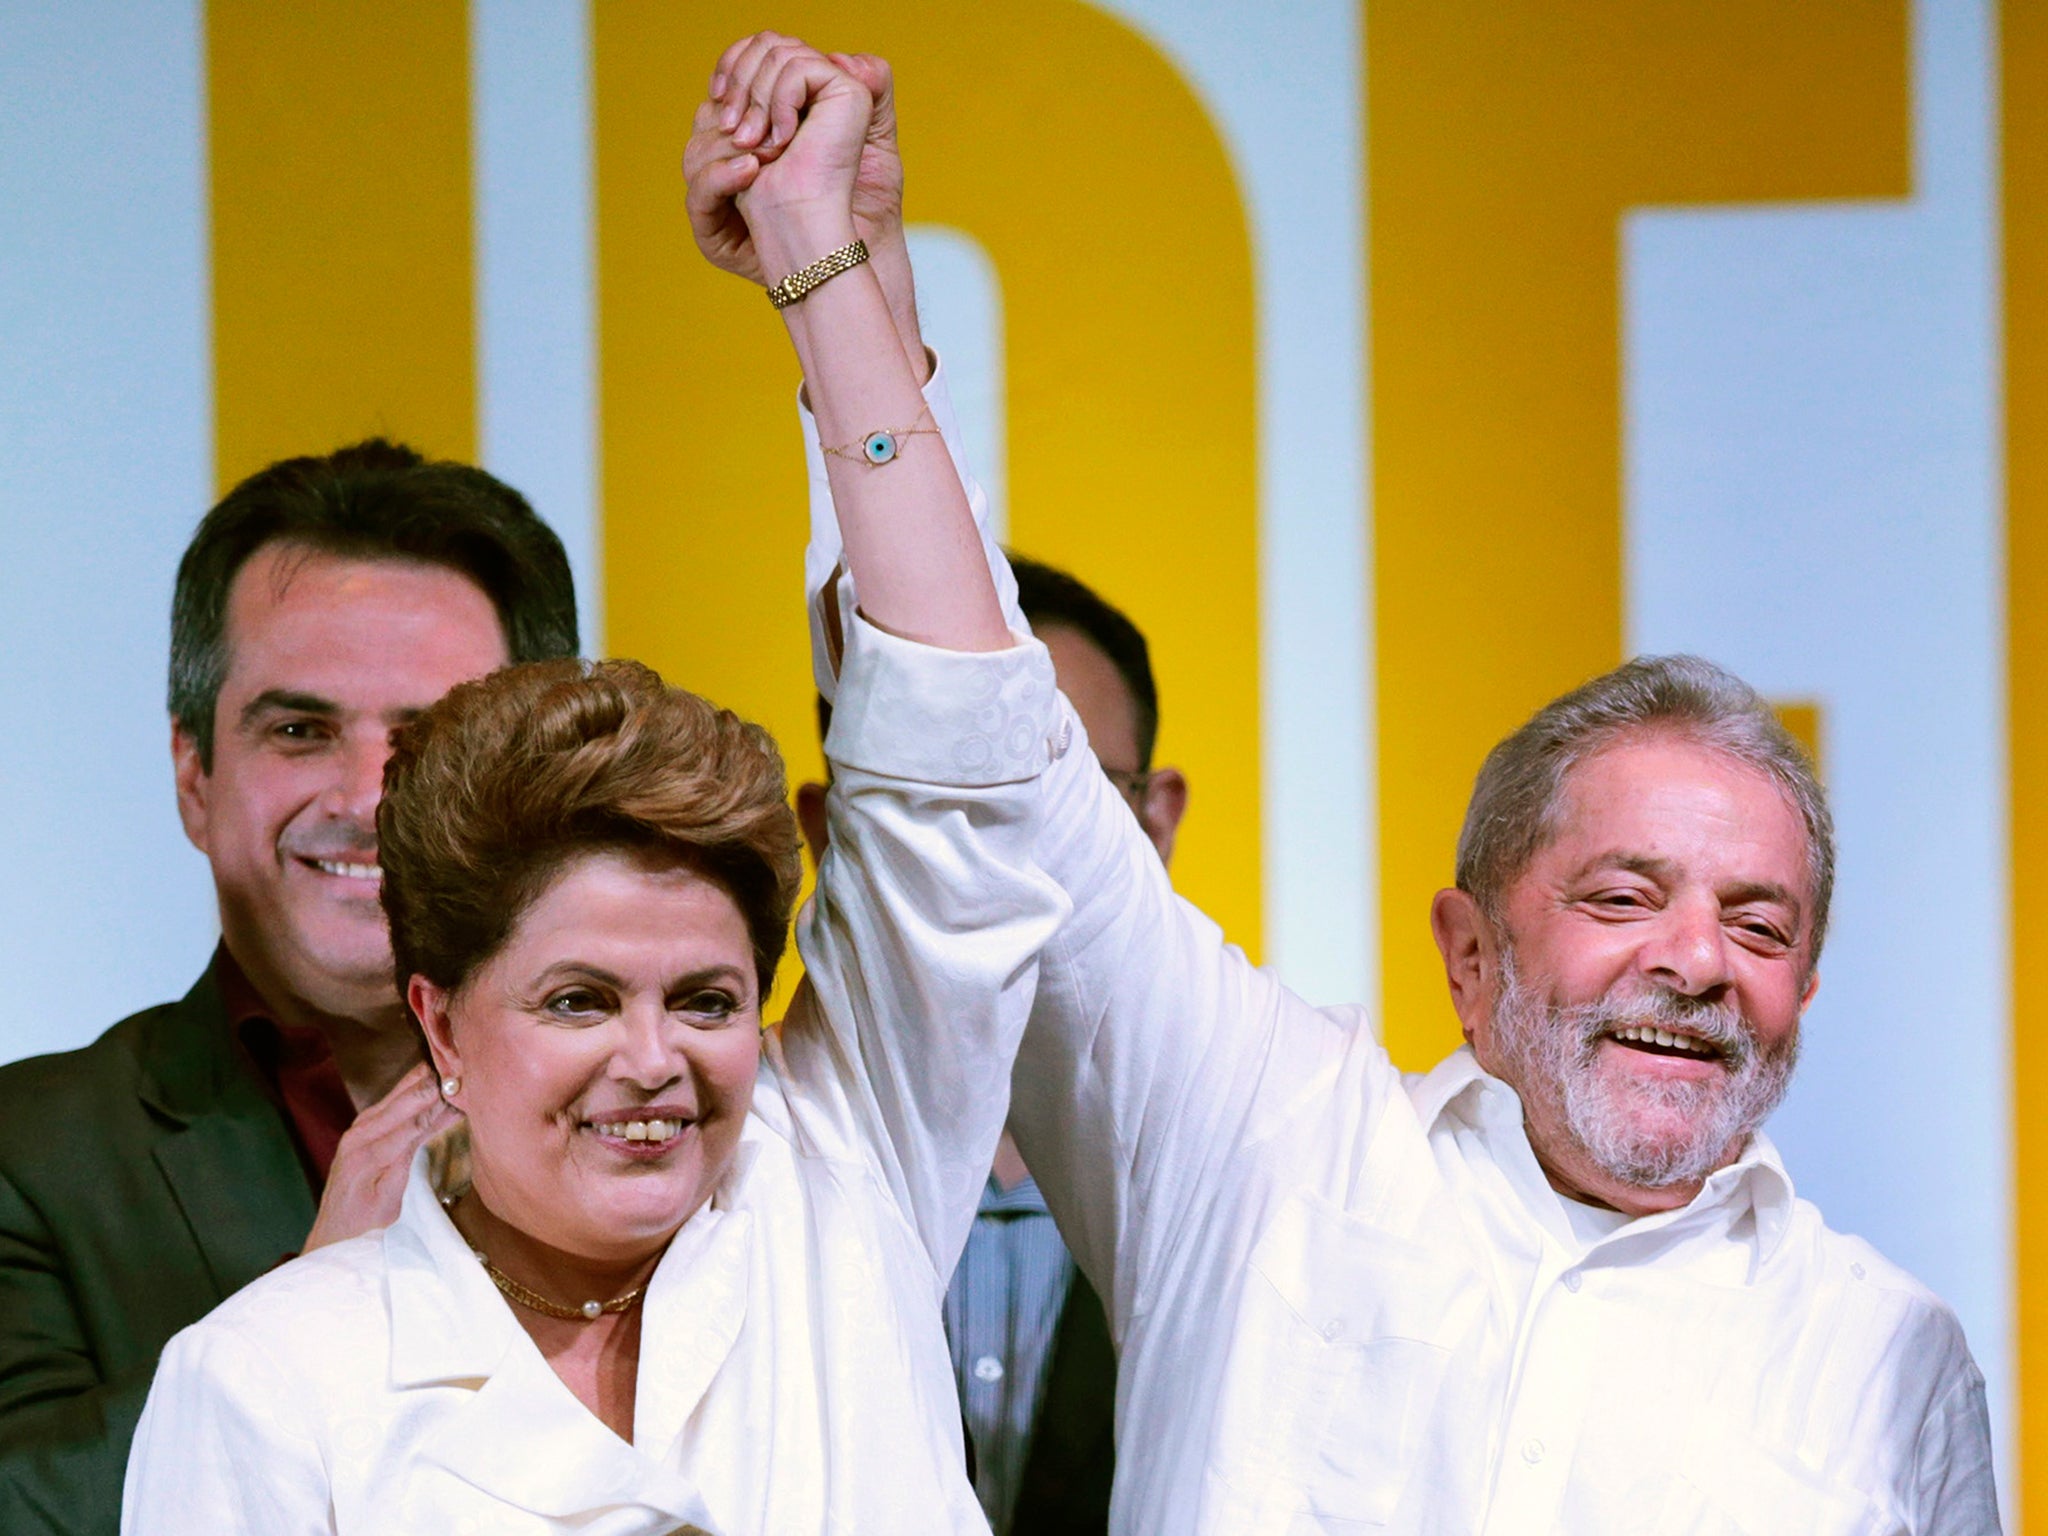 Brazil's President and Workers' Party (PT) presidential candidate Dilma Rousseff (L) and former president Luiz Inacio Lula da Silva celebrate during news conference after disclosure of the election results, in Brasilia. Rousseff narrowly won re-election a